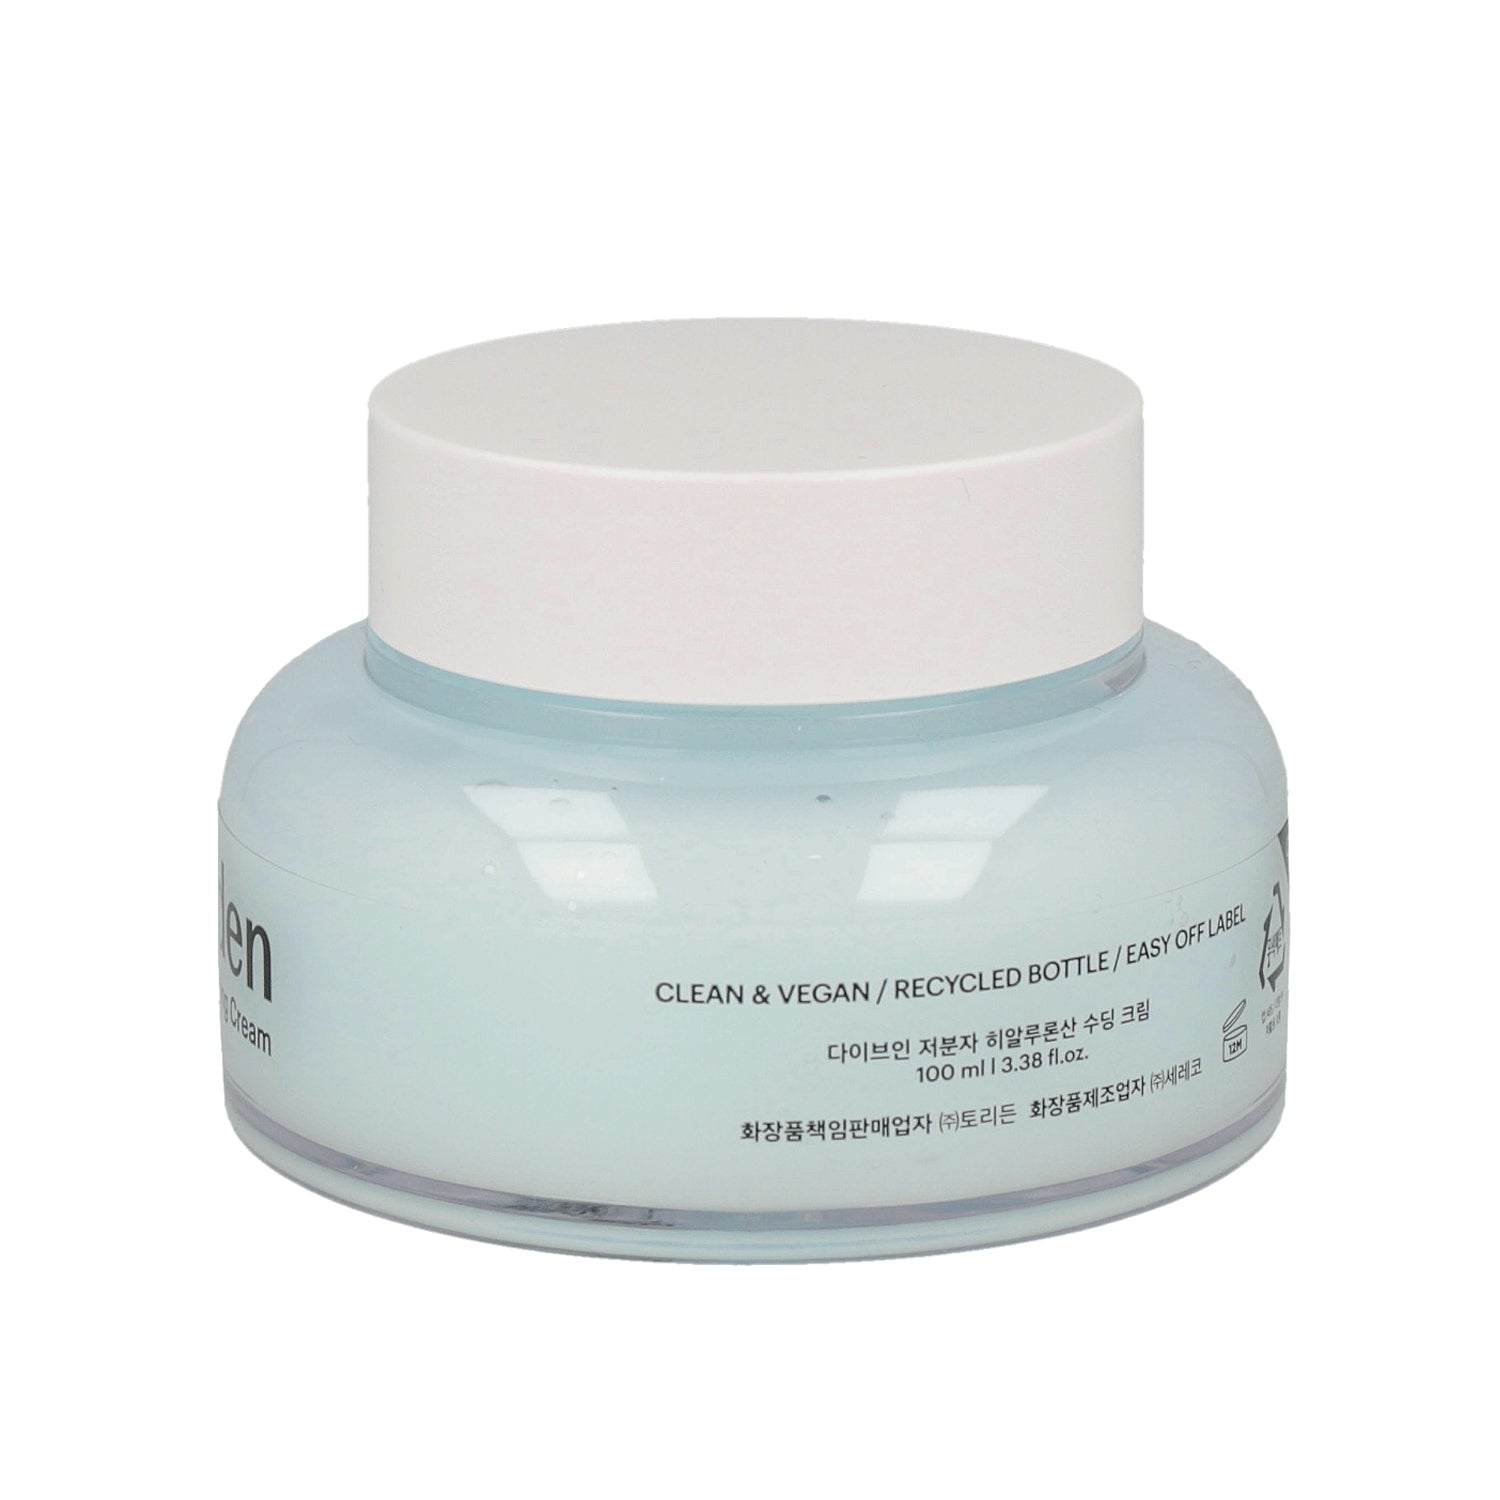 Offers a lightweight, non-greasy texture that absorbs quickly.